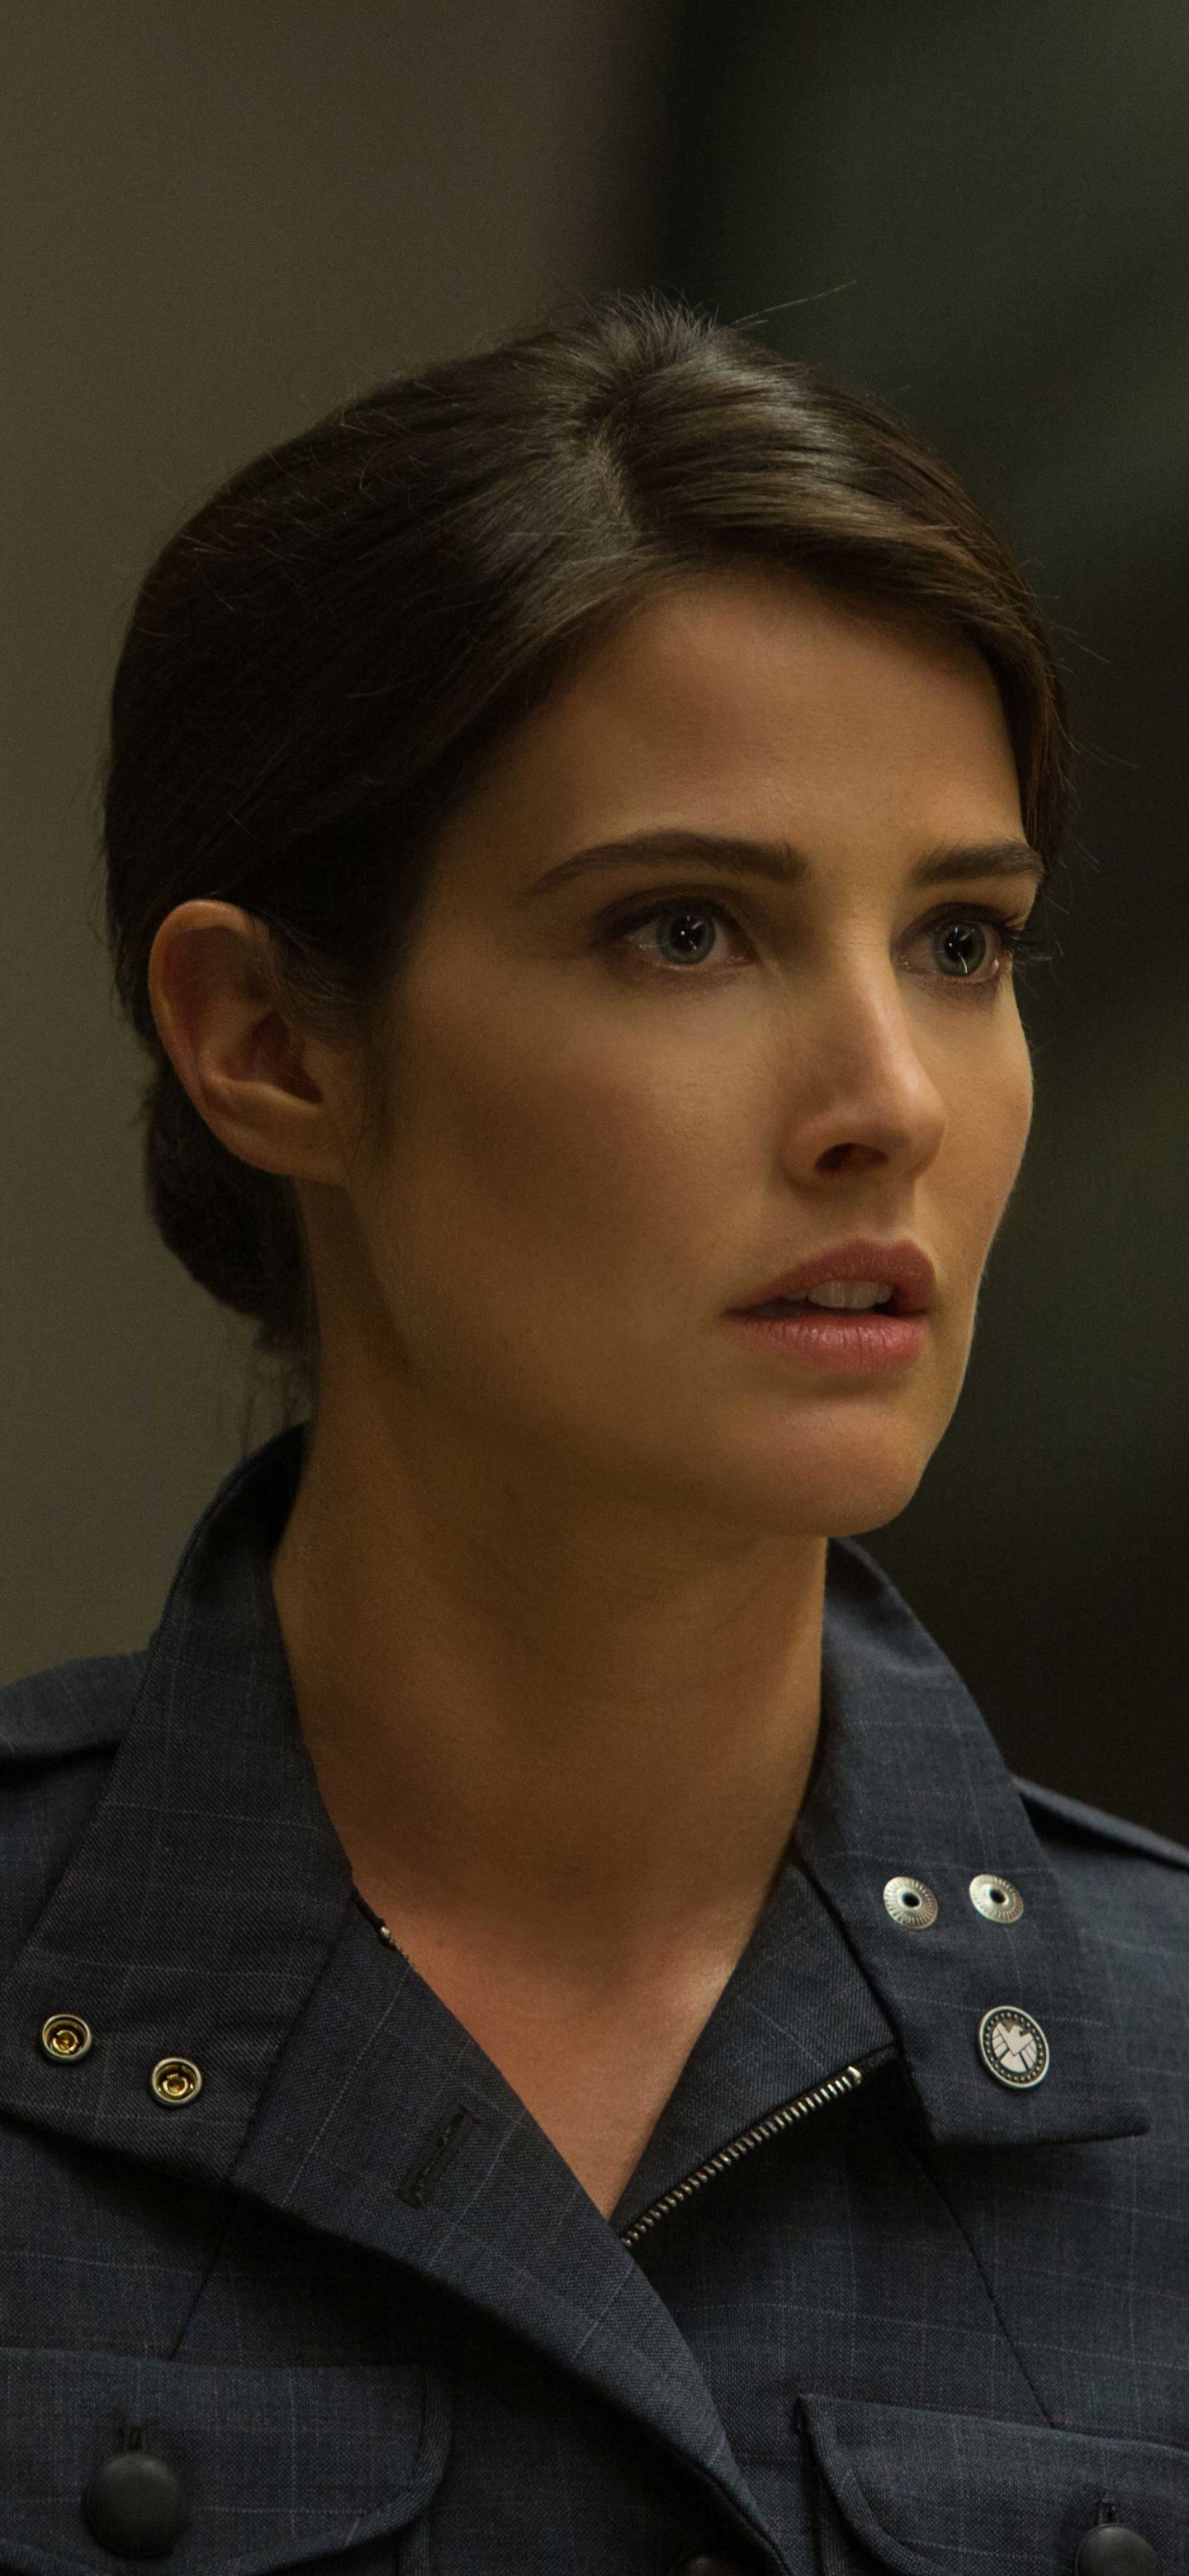 cobie smulders, movie, captain america: the winter soldier, maria hill, captain america Aesthetic wallpaper